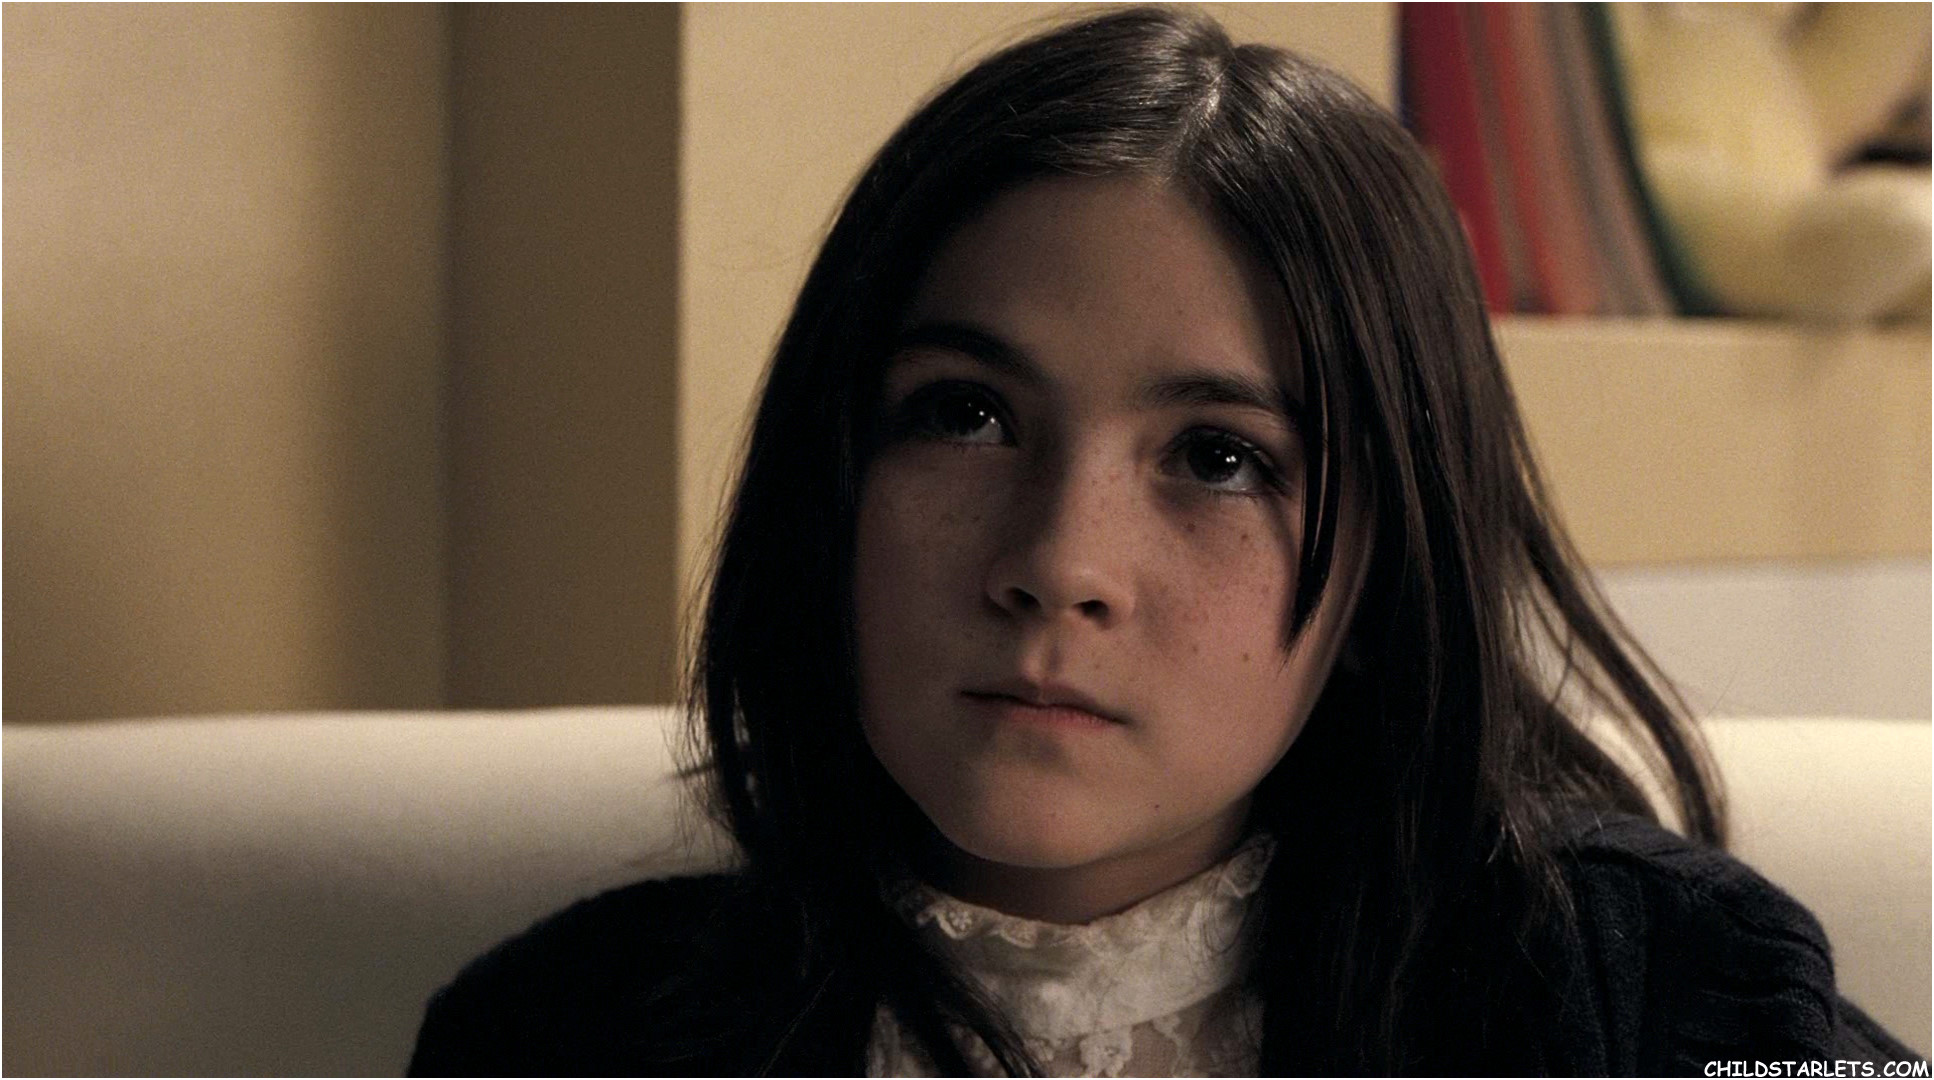 How old is Isabelle Orphan?